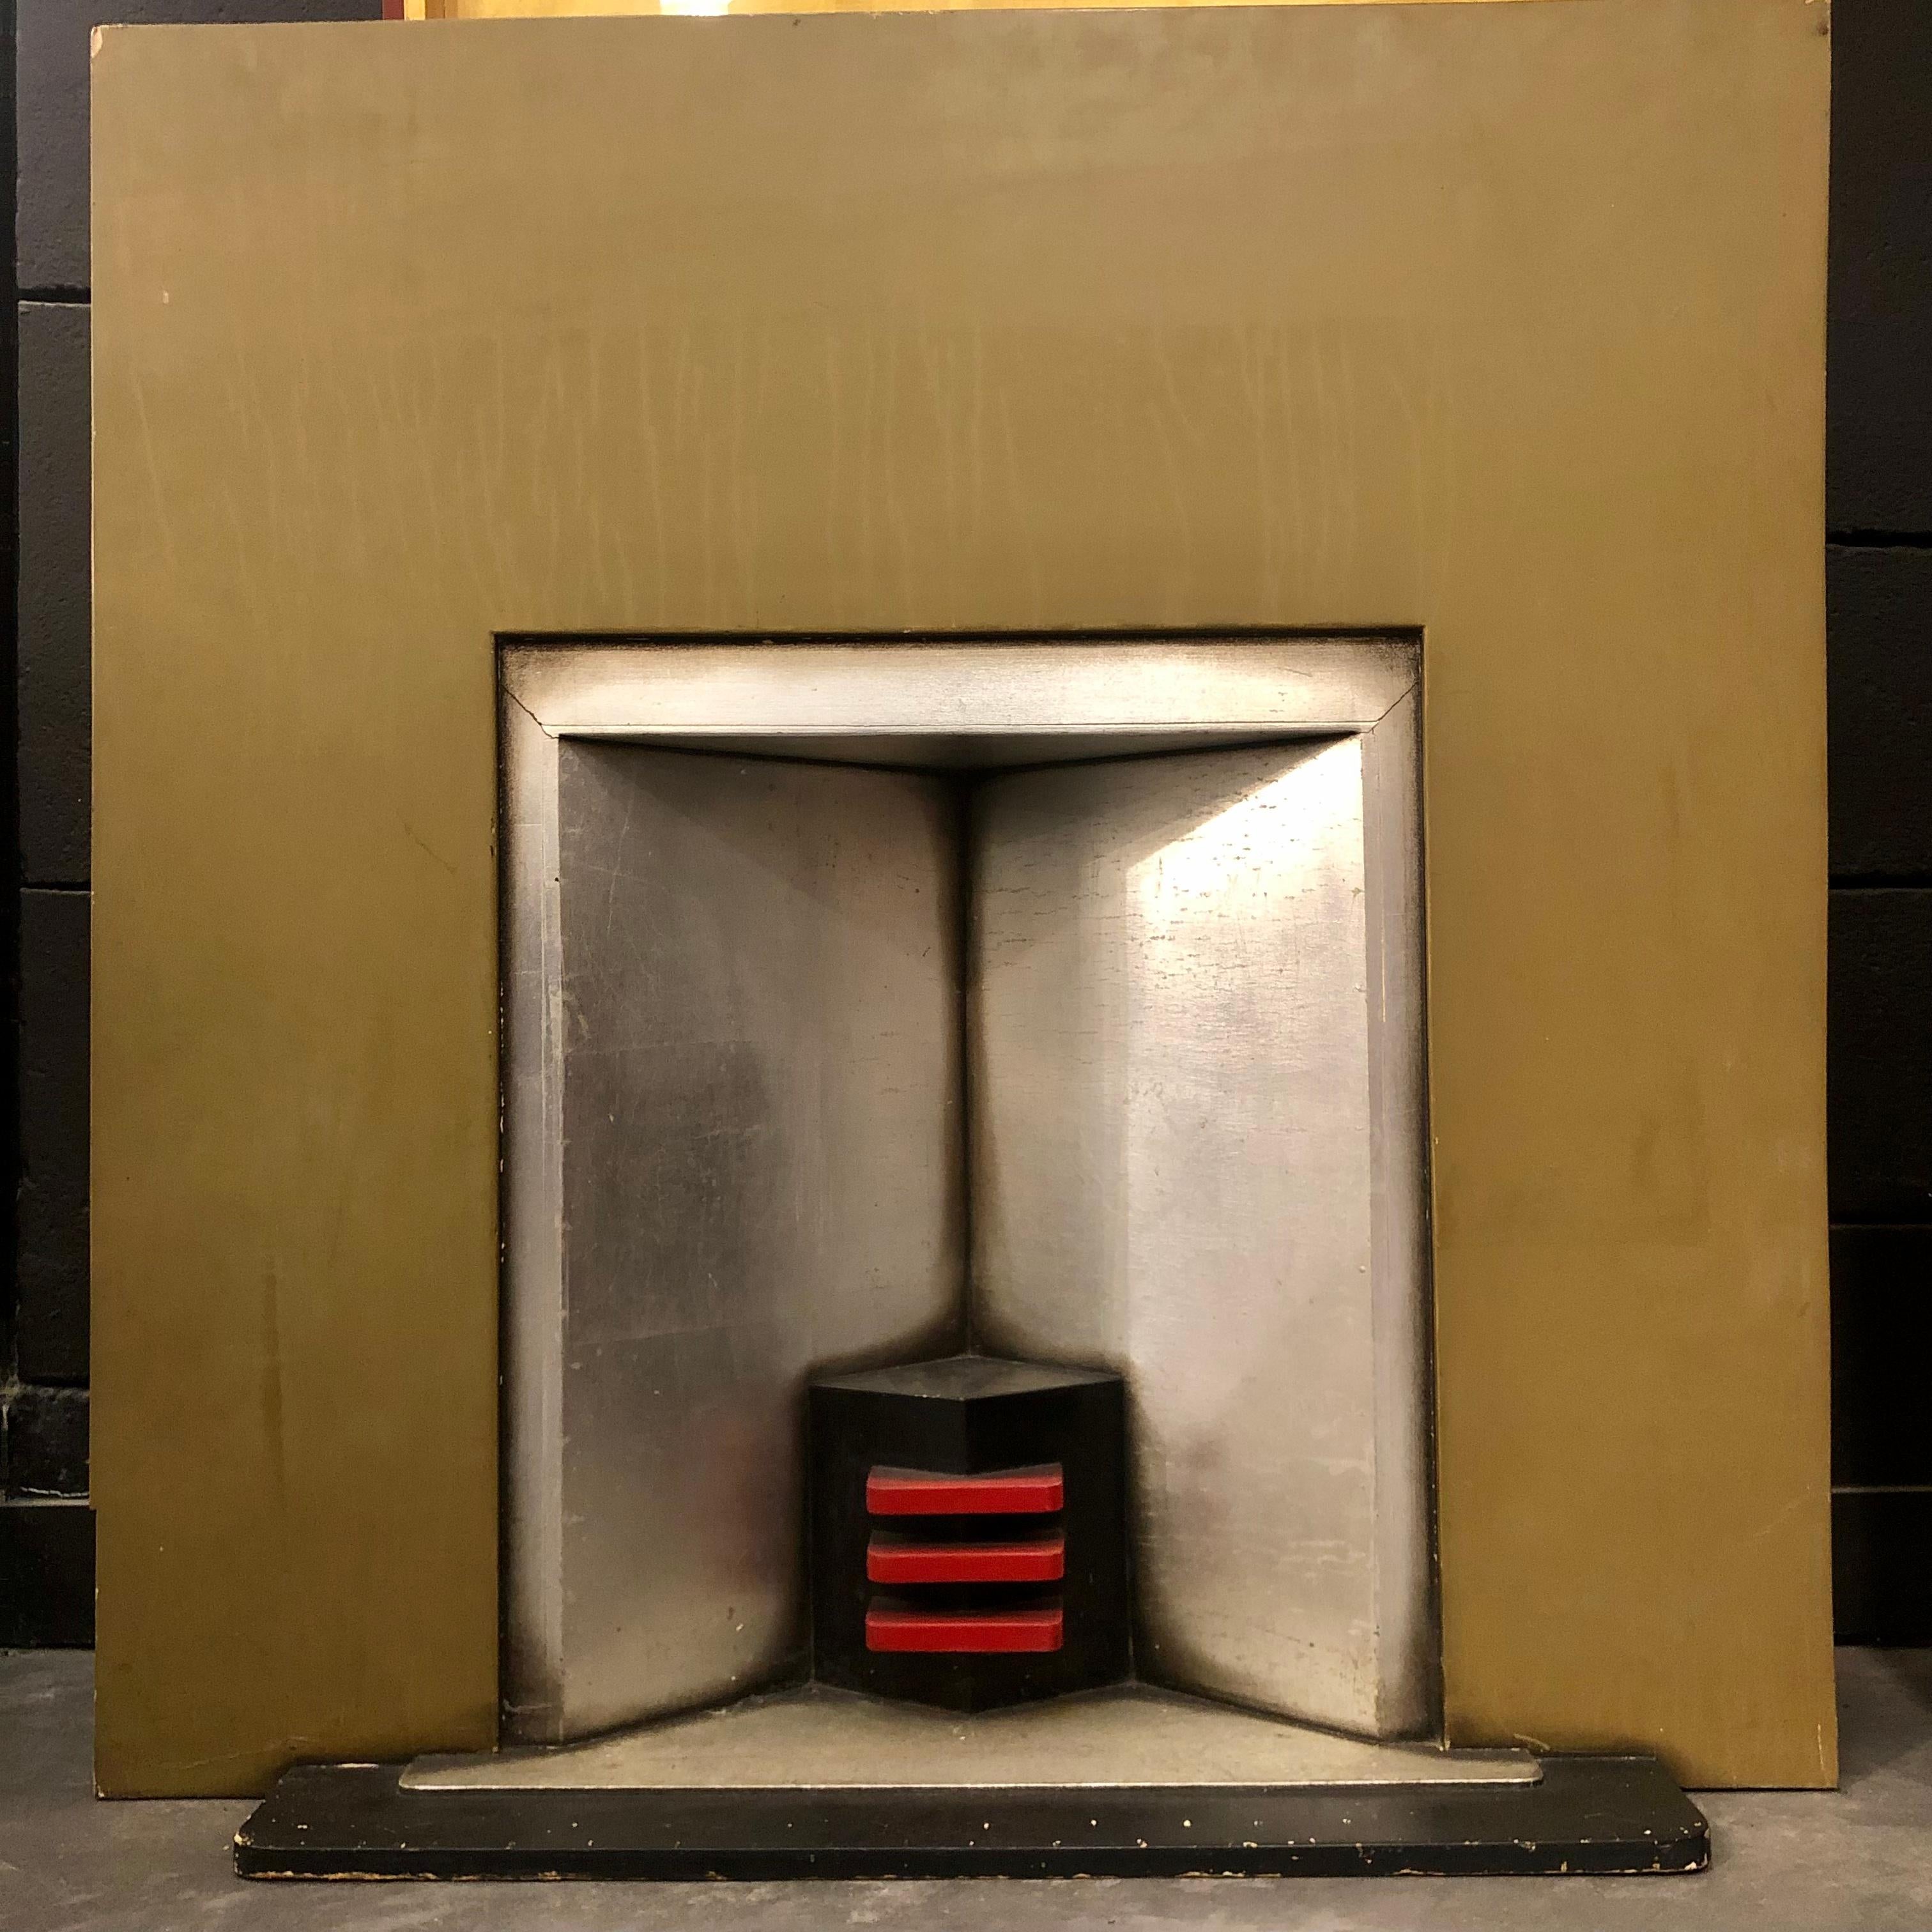 Art Deco mantel fireplace in lacquered wood attributed to huib hoste Flemish modernist architect .
The mantel is in lacquered silver wood.
Very uncommon and pure Art Deco style.